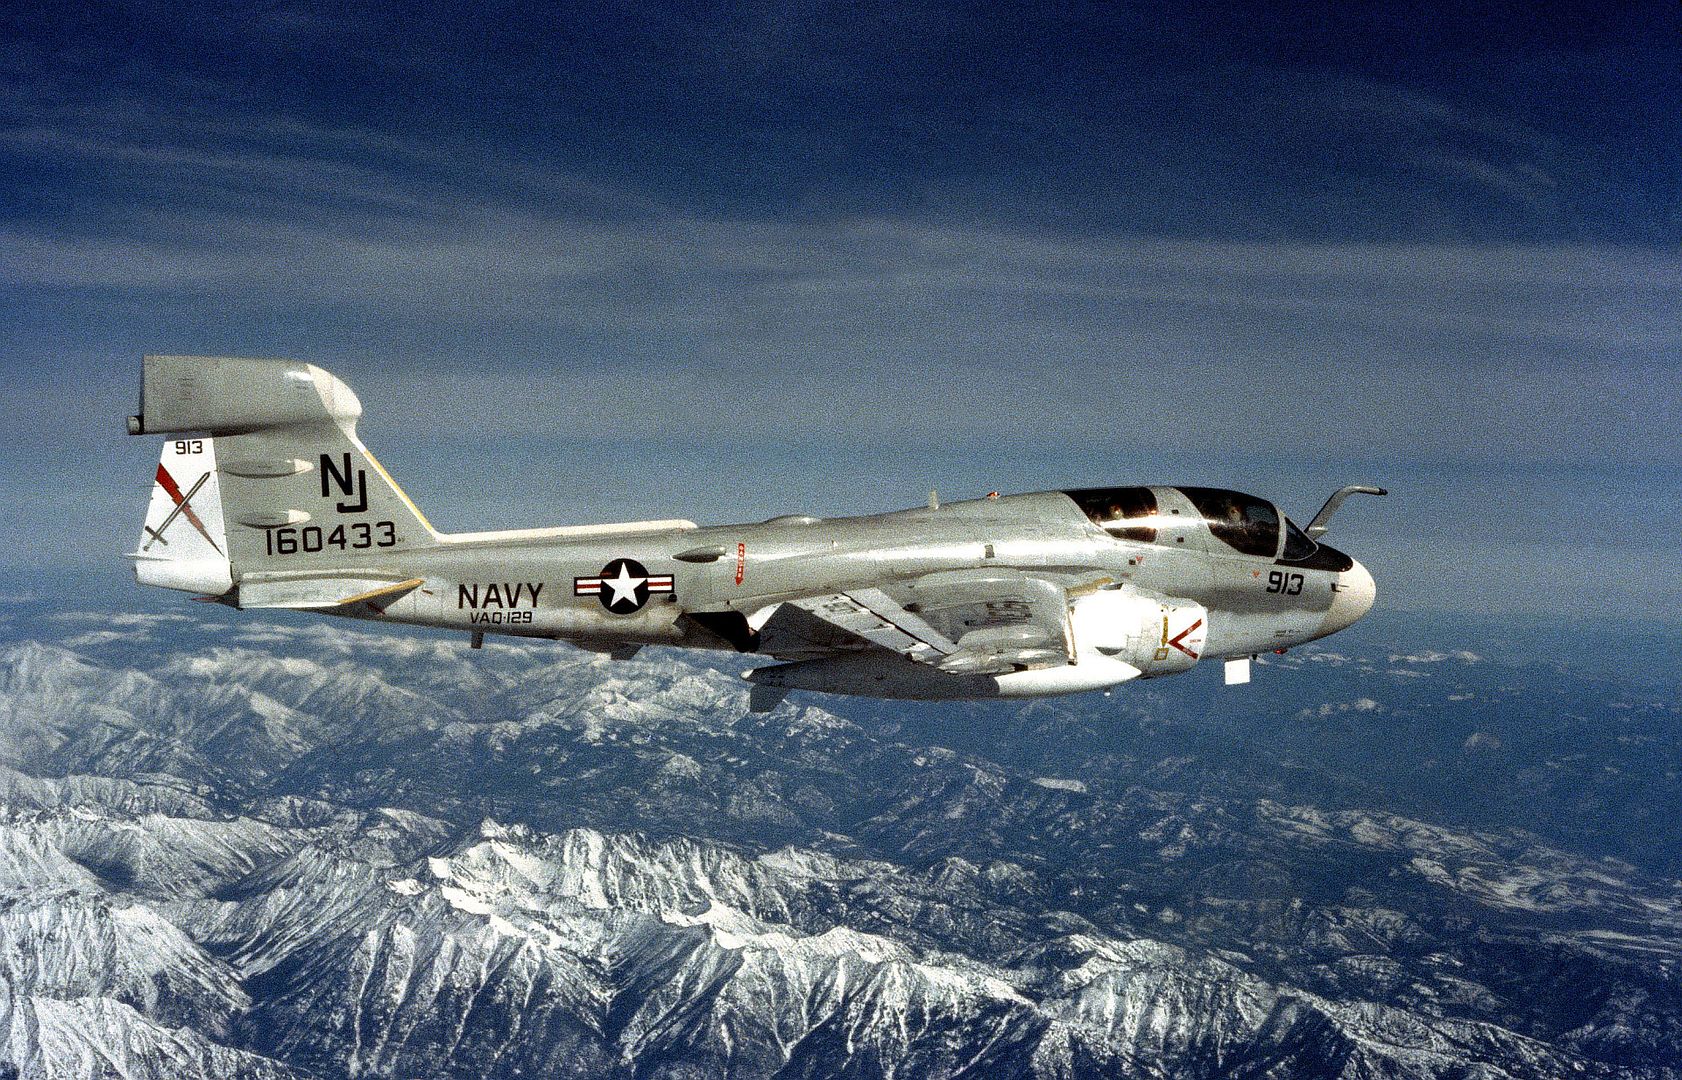 6B Prowler Aircraft From Tactical Electronic Warfare Squadron 129